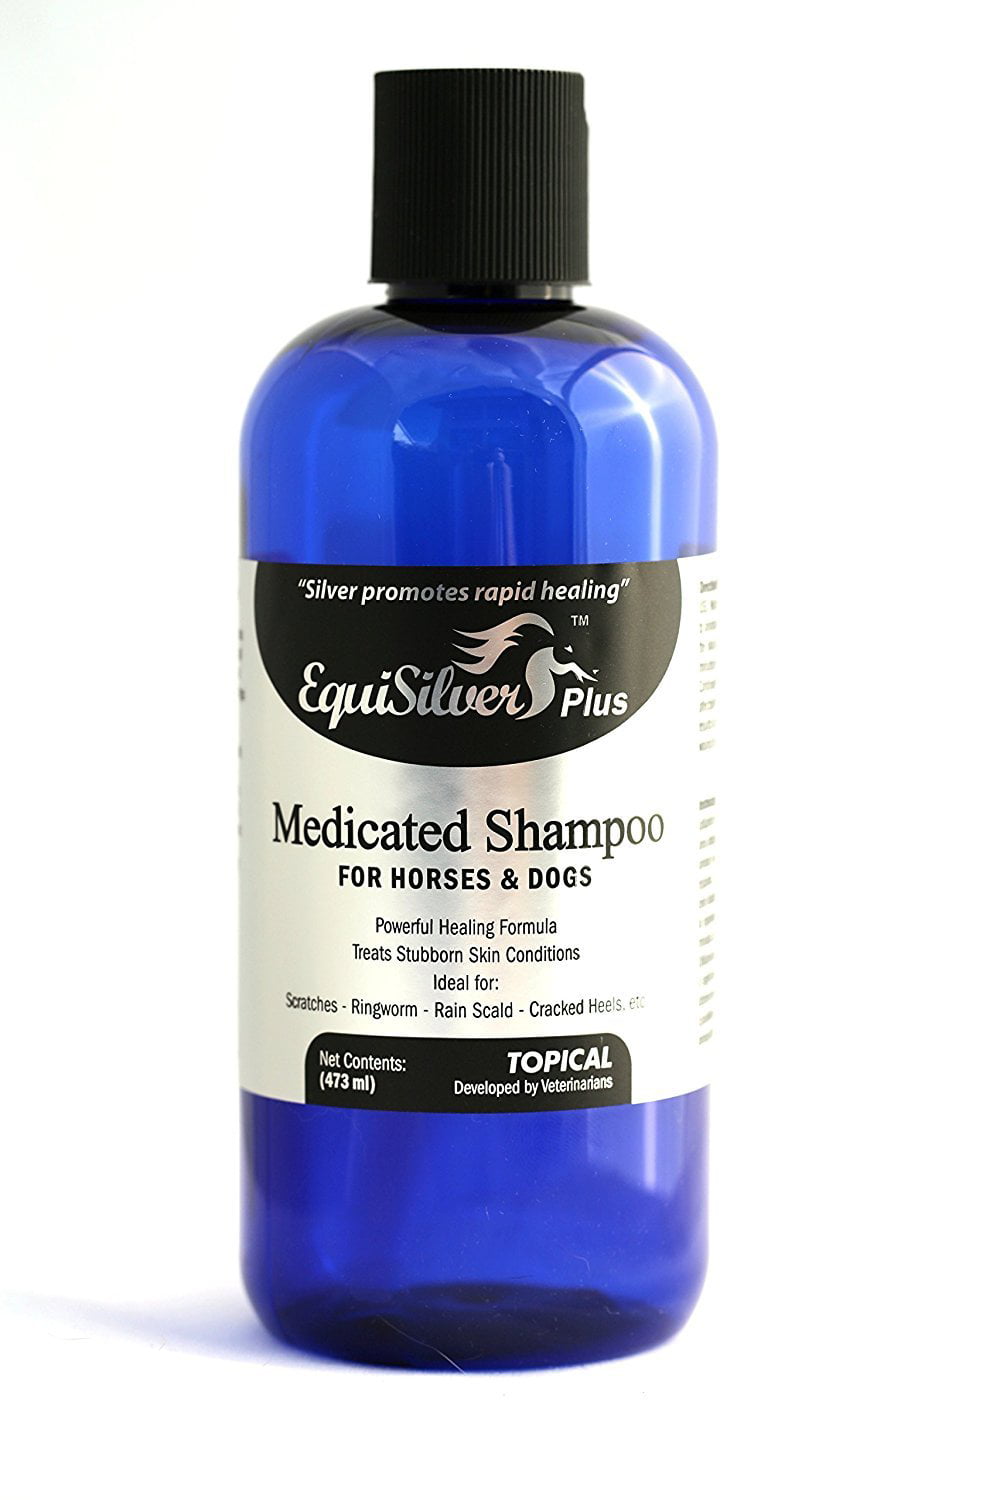 EquiSilver Medicated Pet Shampoo with Chelated Silver